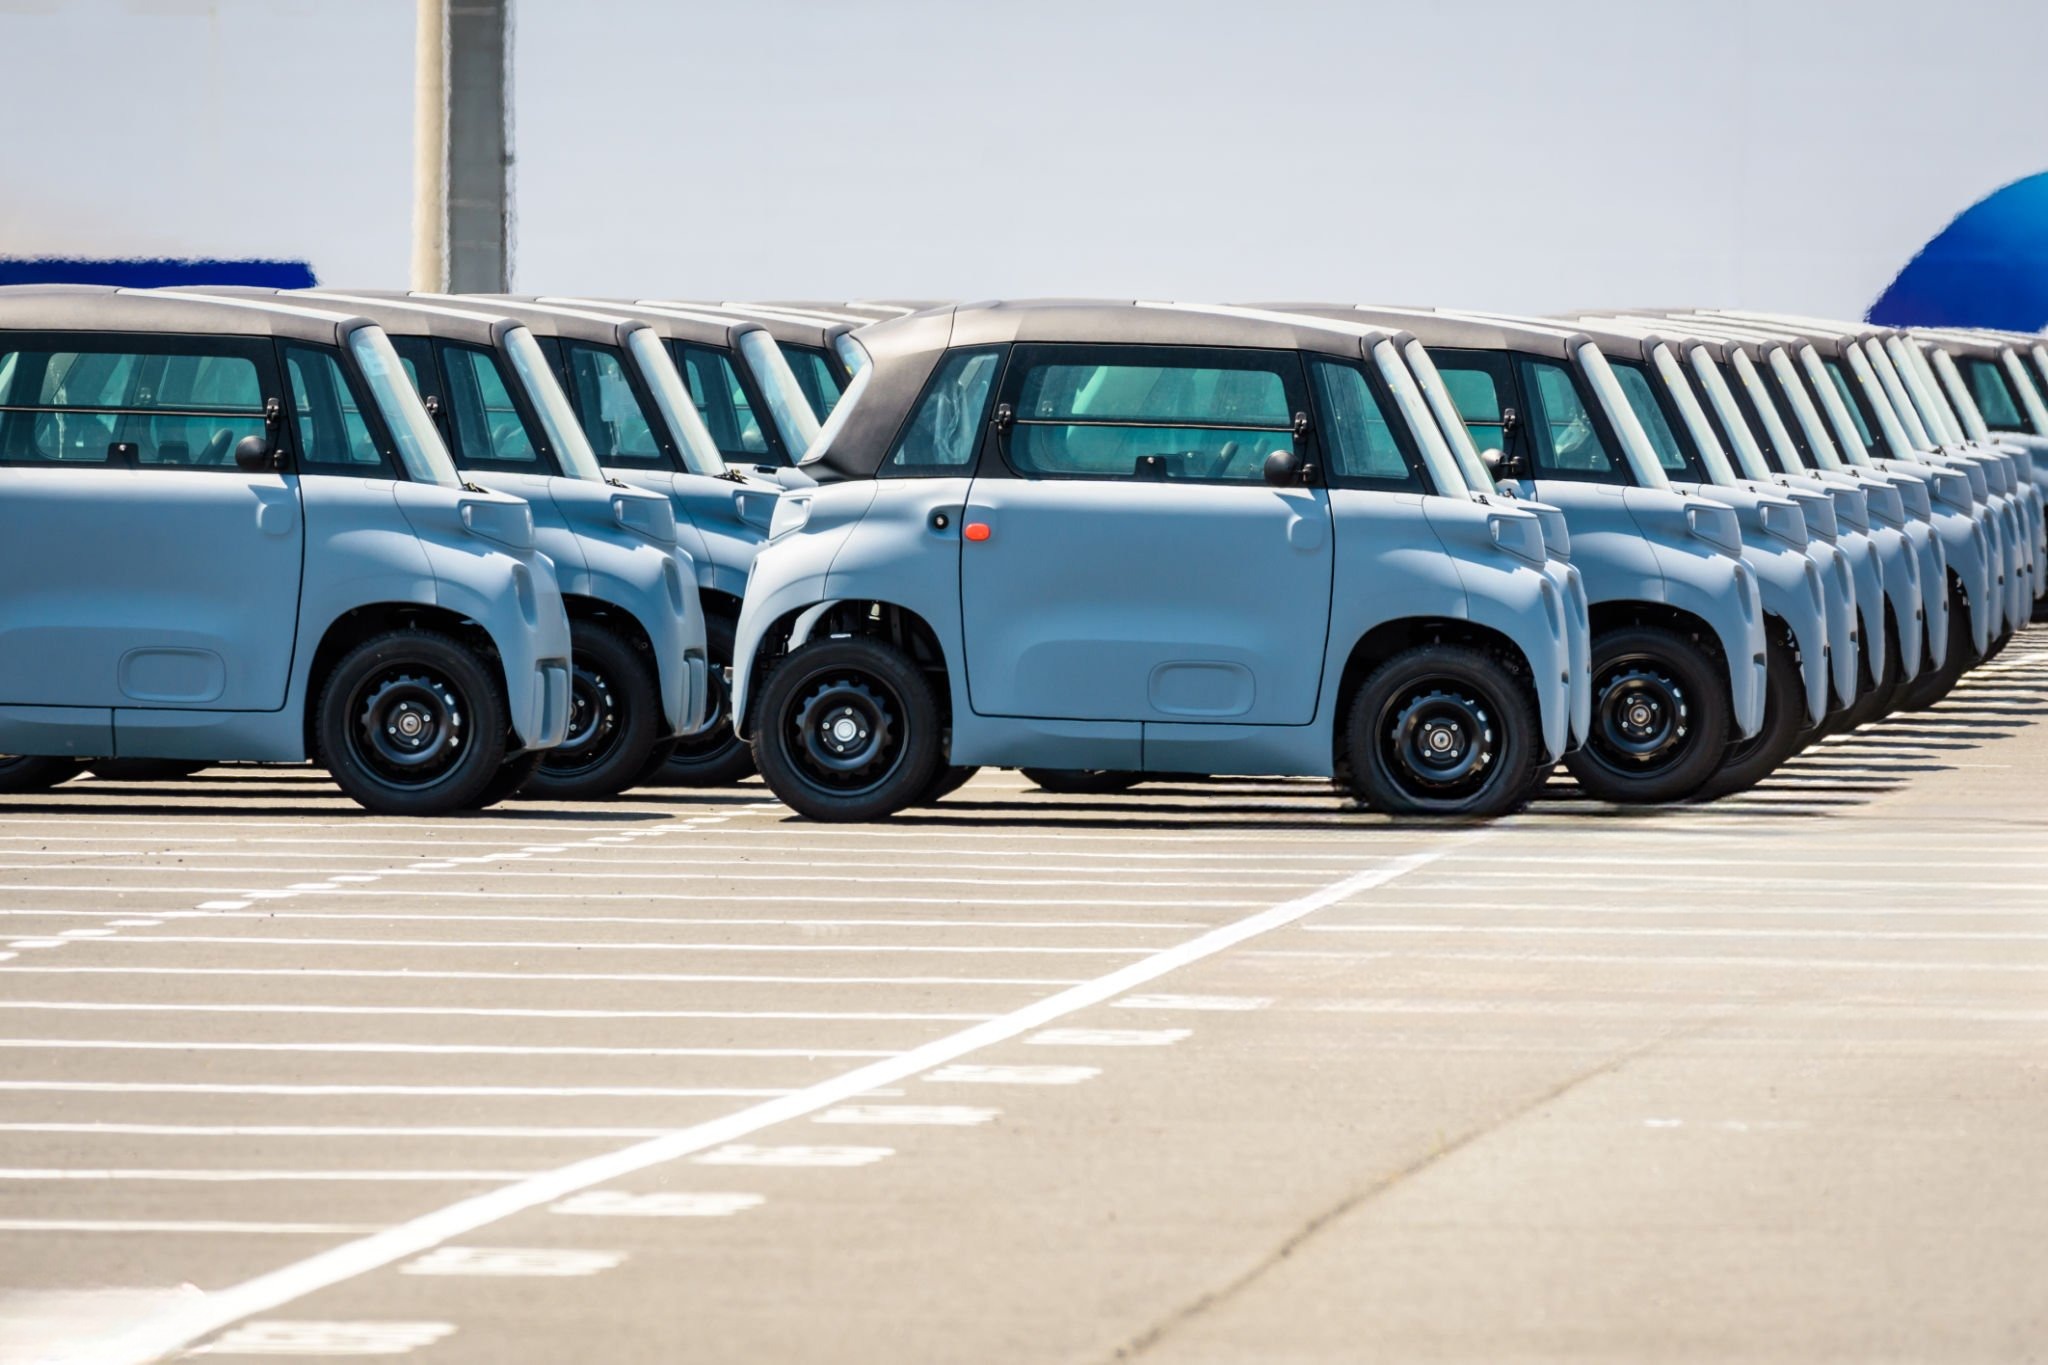 brand-new-citroën-ami-electric-microcars-lined-up-in-a-parking-lotygd